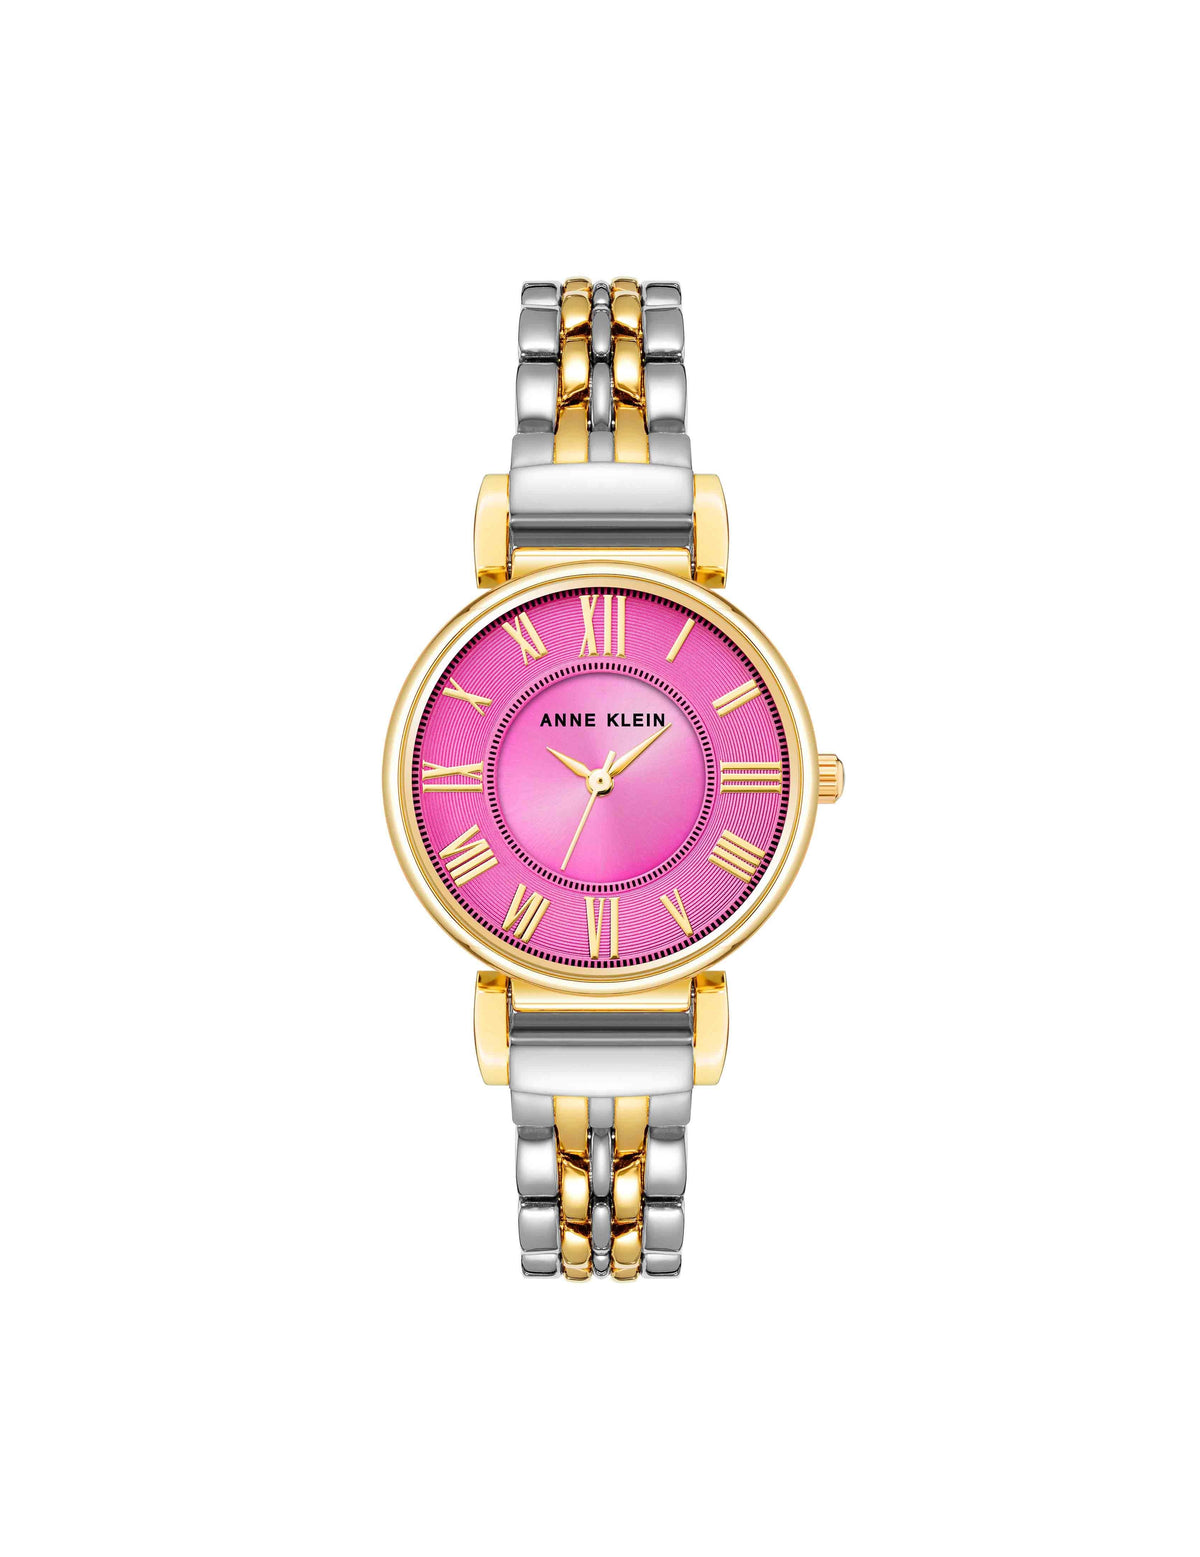 Anne Klein Two-Tone/ Hot Pink Roman Numeral Dial Watch